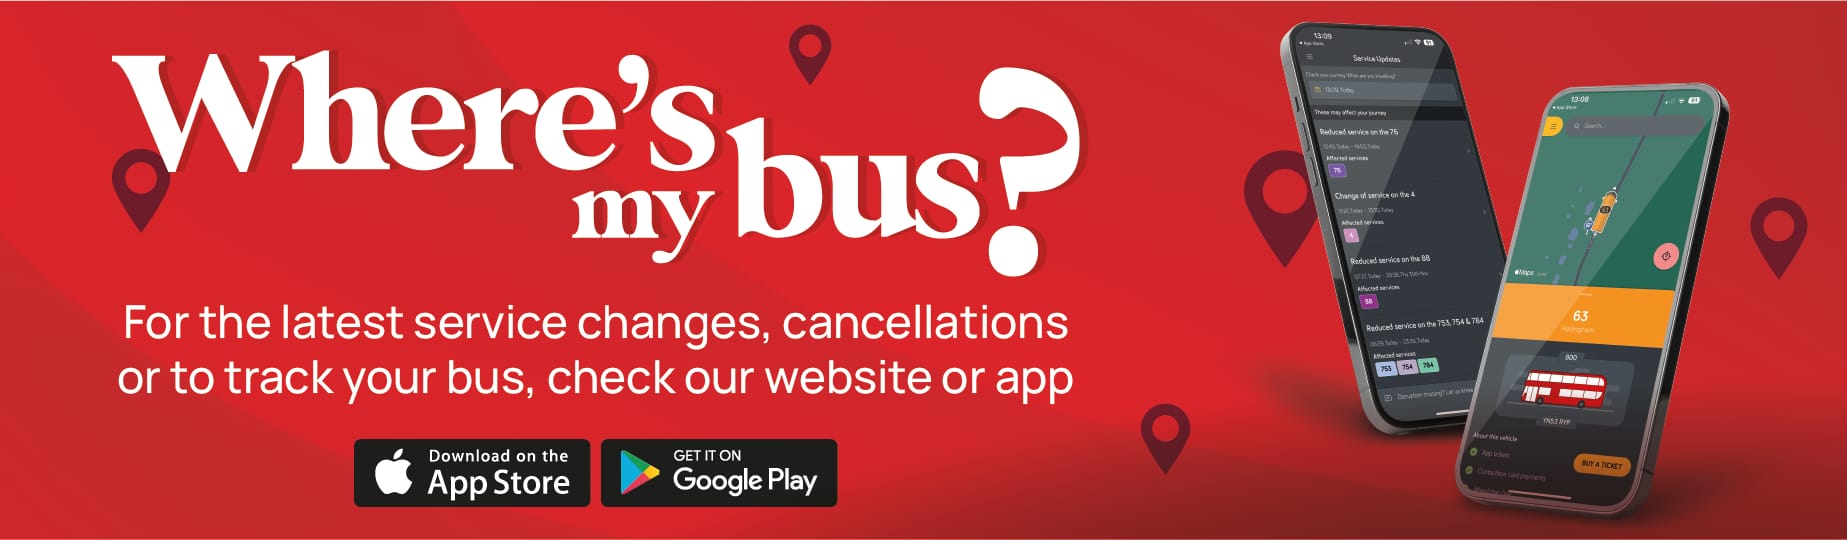 Keep up to date on service changes with our travel app